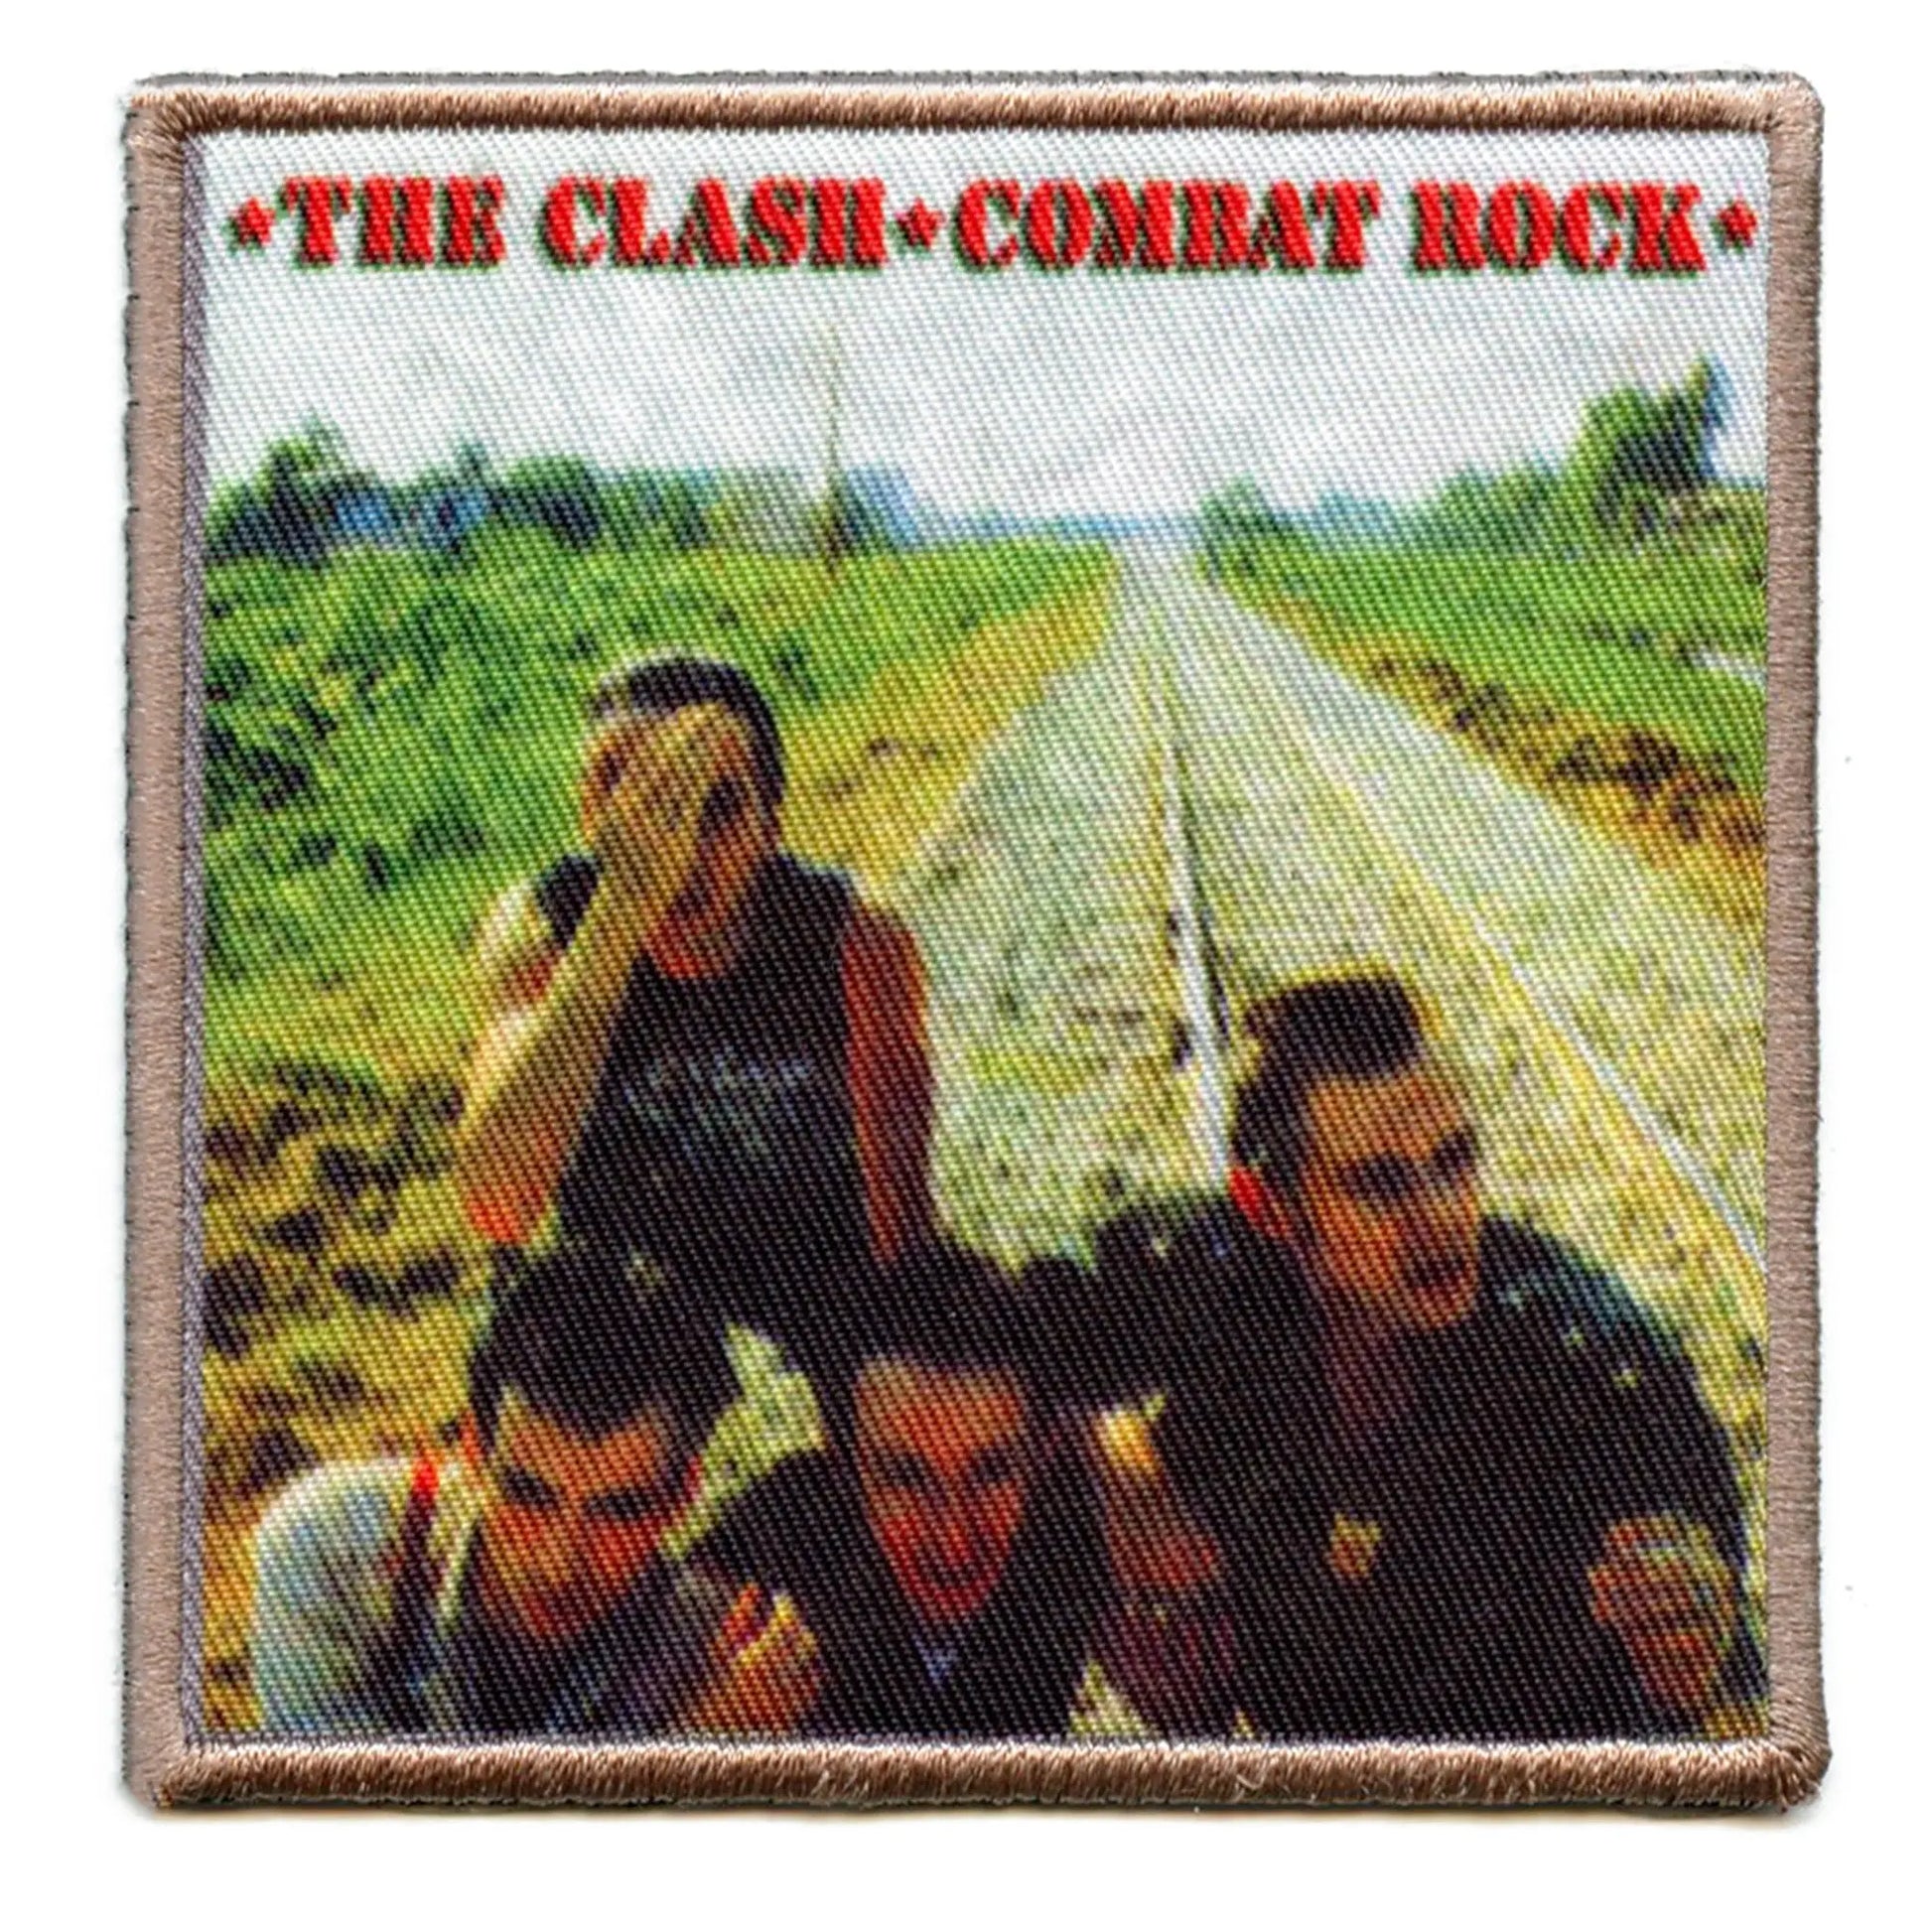 The Clash Combat Rock Patch Members Road Cover Sublimated Embroidered Iron On